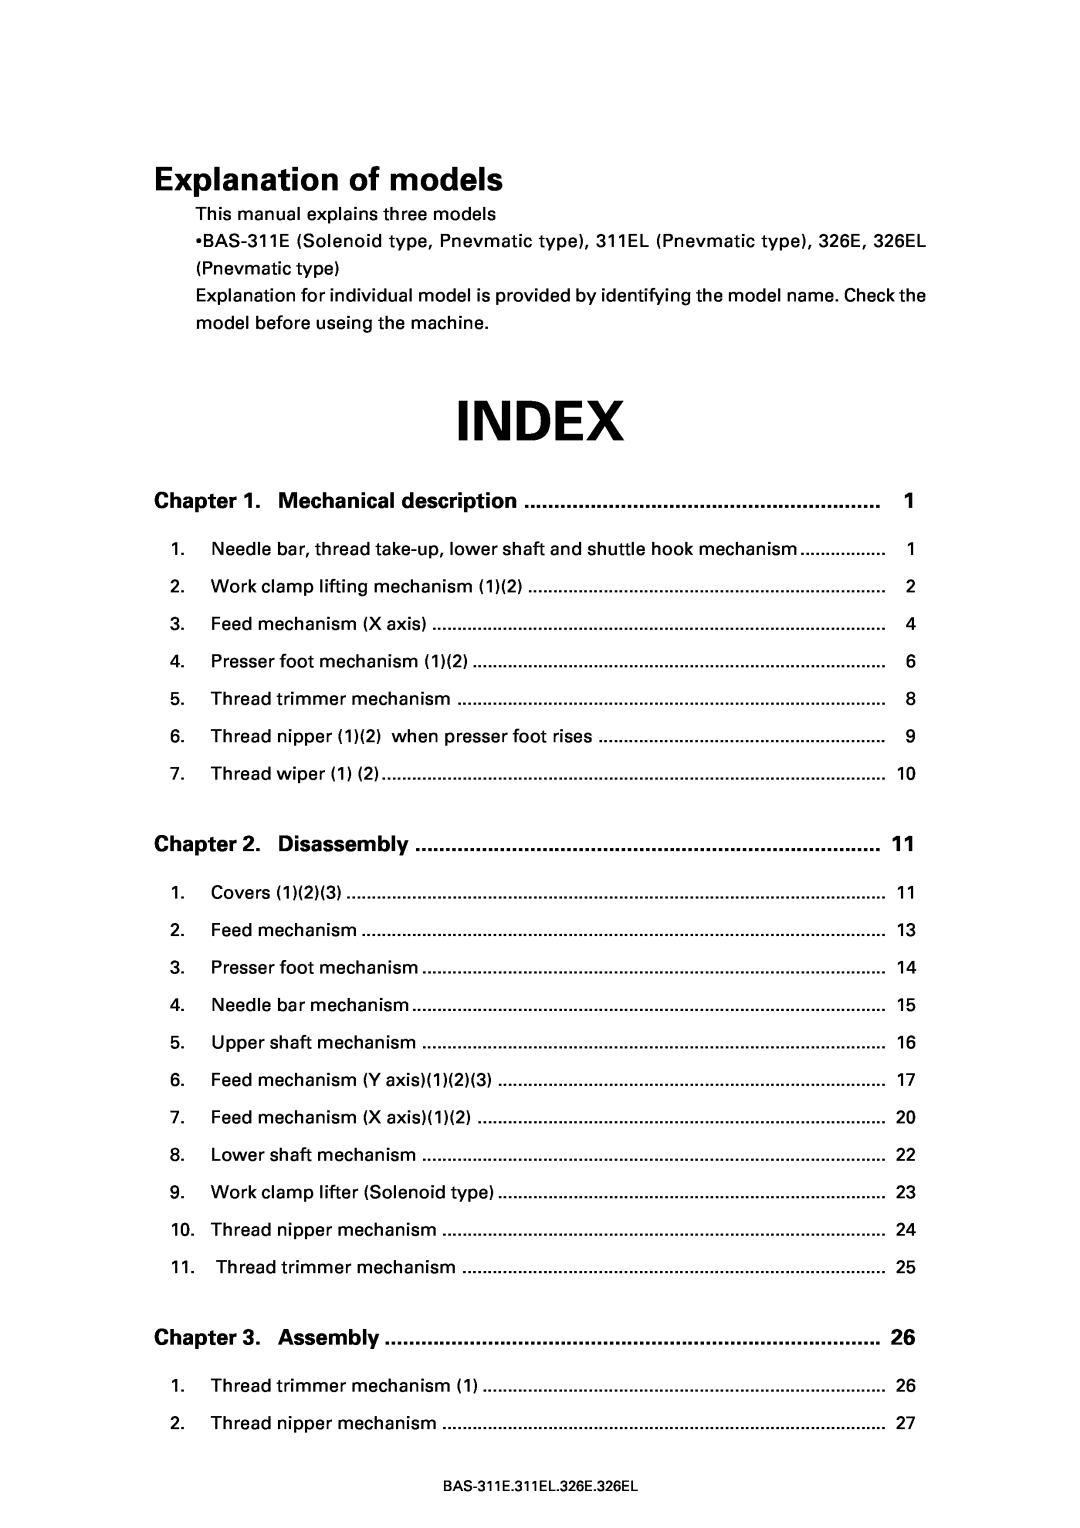 Brother BAS-311E service manual Explanation of models, Index 